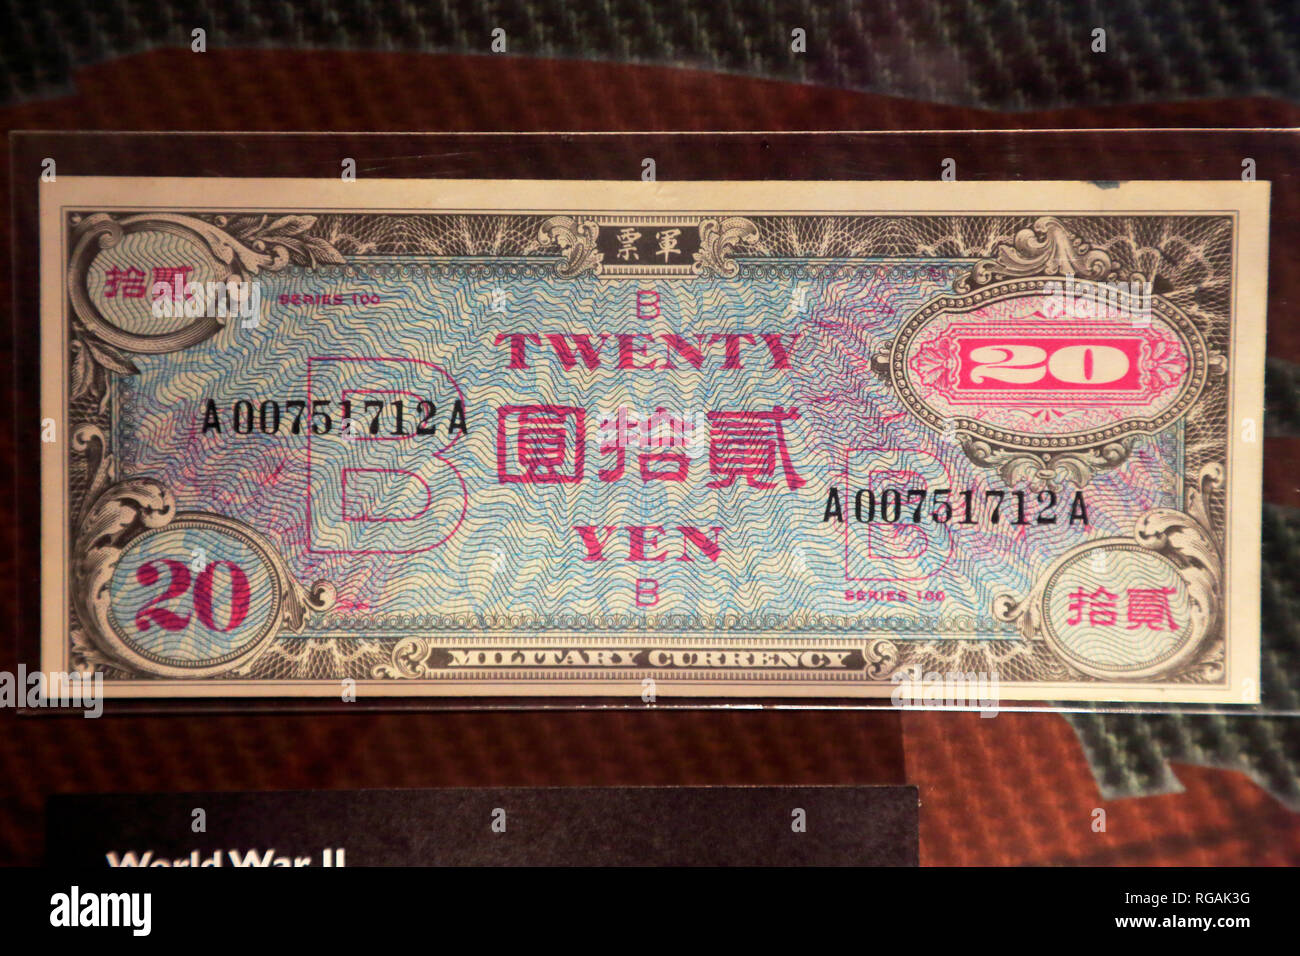 A 20 Yen Japanese Military Paper Currency display at Money Museum in Federal Reserve Bank of Chicago. Illinois.USA Stock Photo